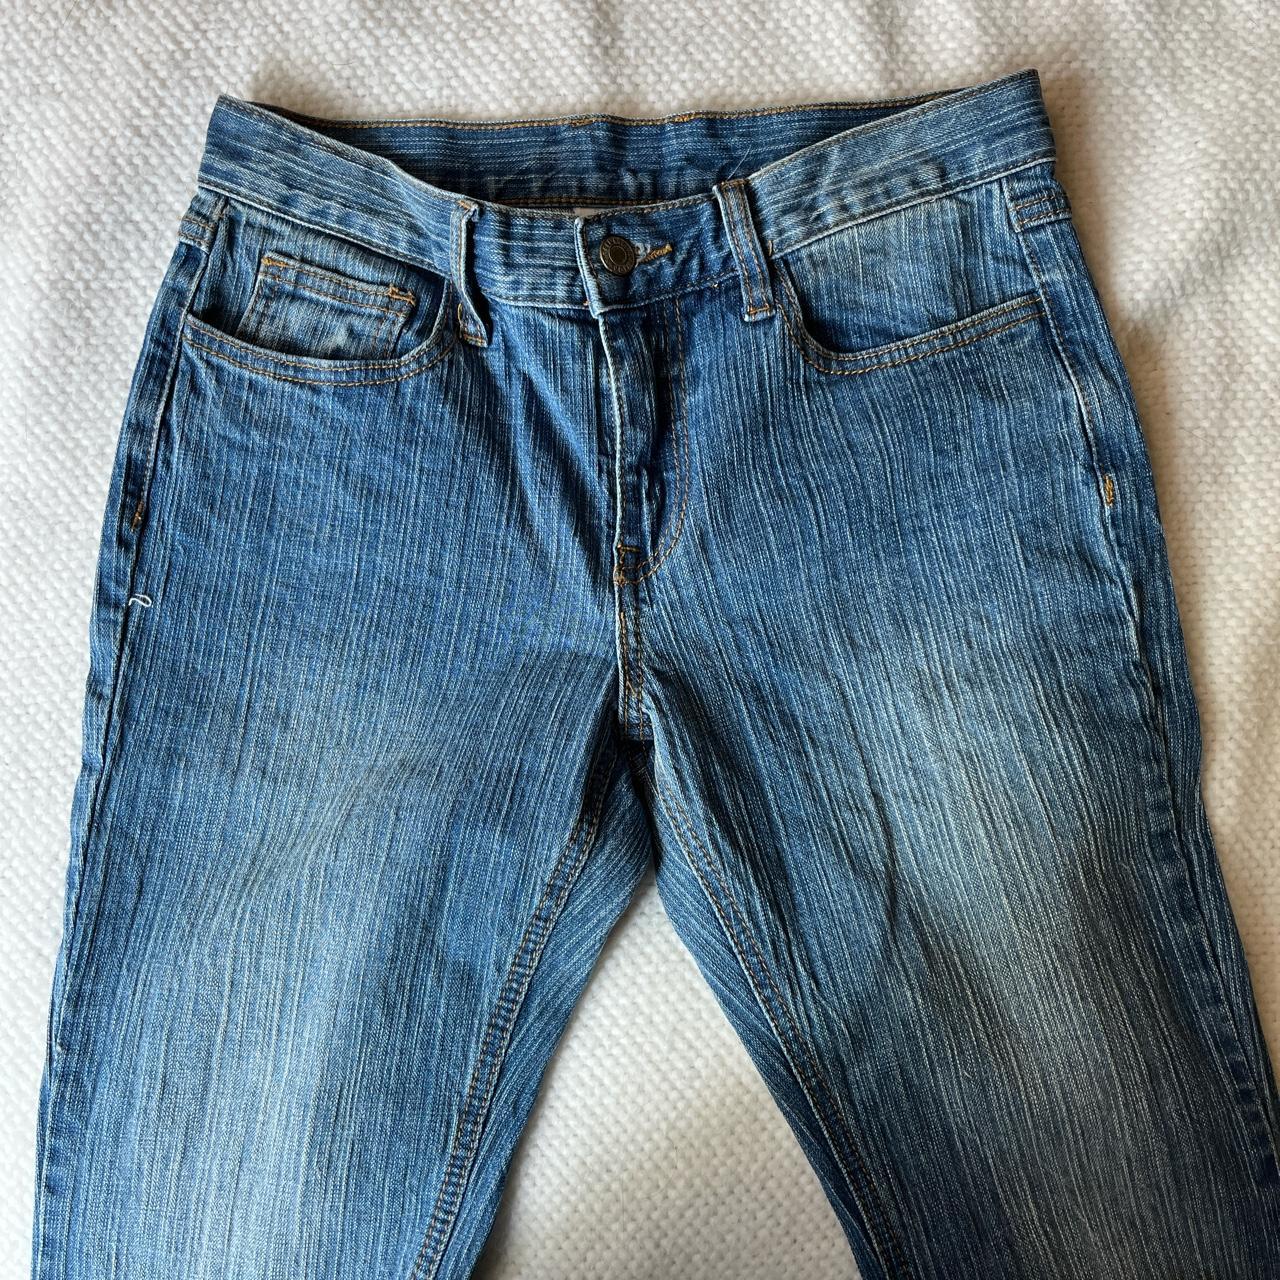 Brandy Melville jeans, low rise flares. Brand new,... - Depop